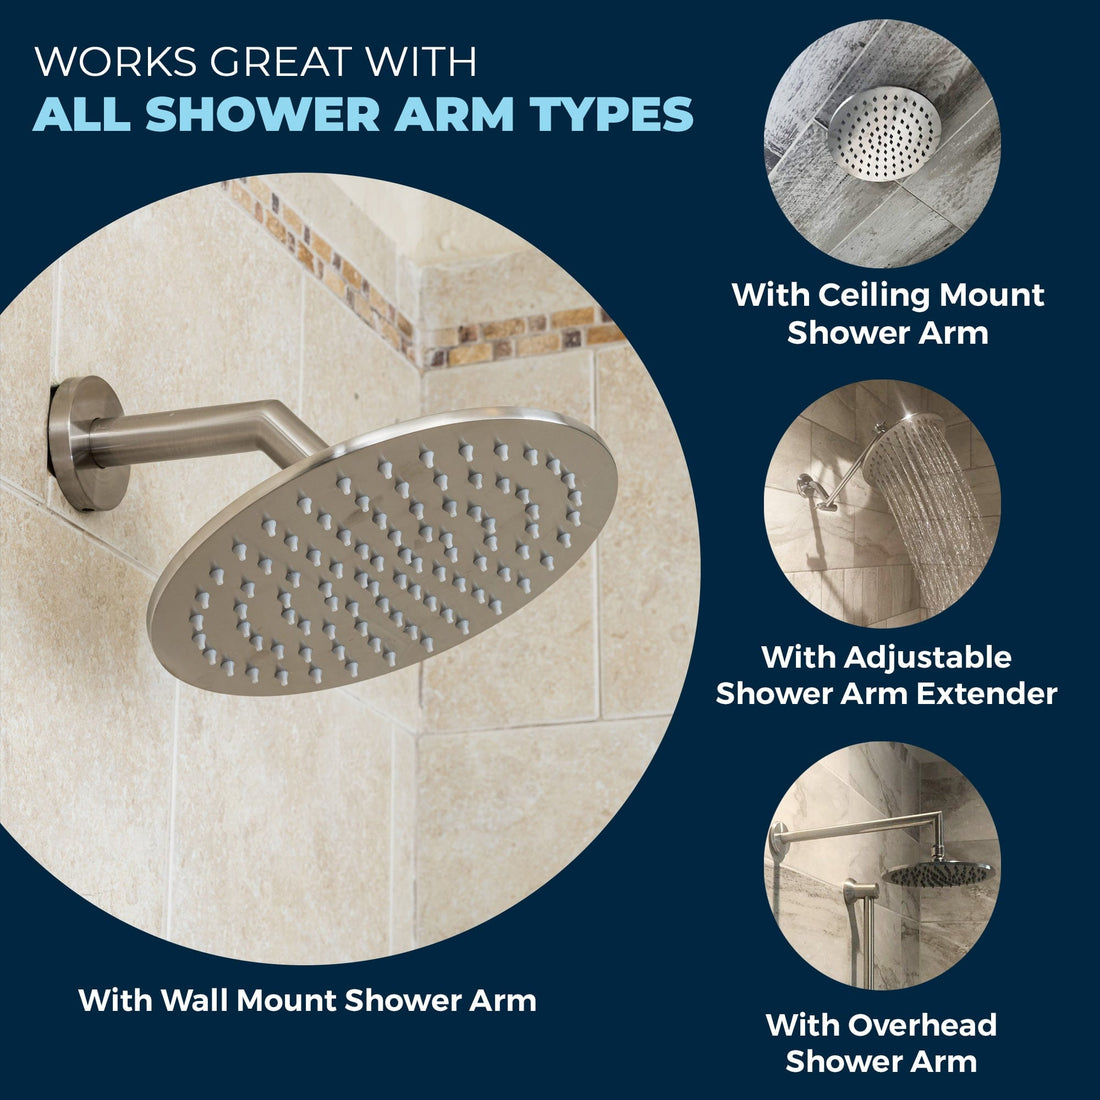 Benefit 3 All Metal 8 Inch Rain Shower Head with 2.5 GPM Rainfall Spray - Canada Brushed Gold / 2.5 - The Shower Head Store